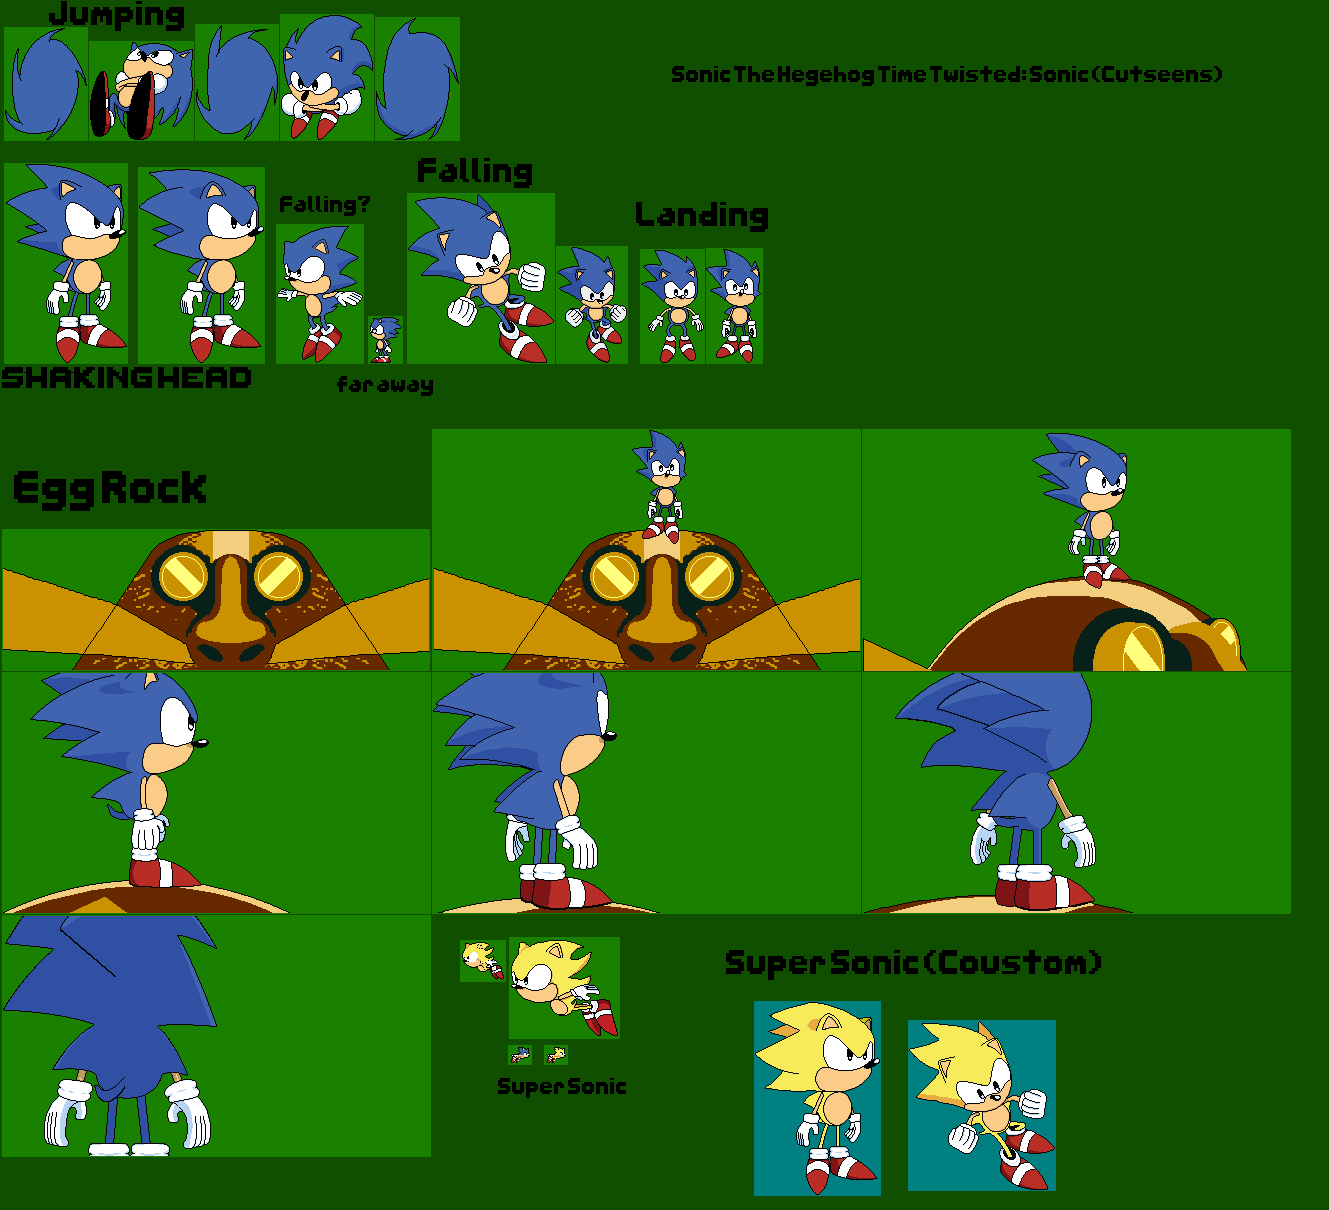 PC / Computer - Retro Sonic - Sonic the Hedgehog - The Spriters Resource